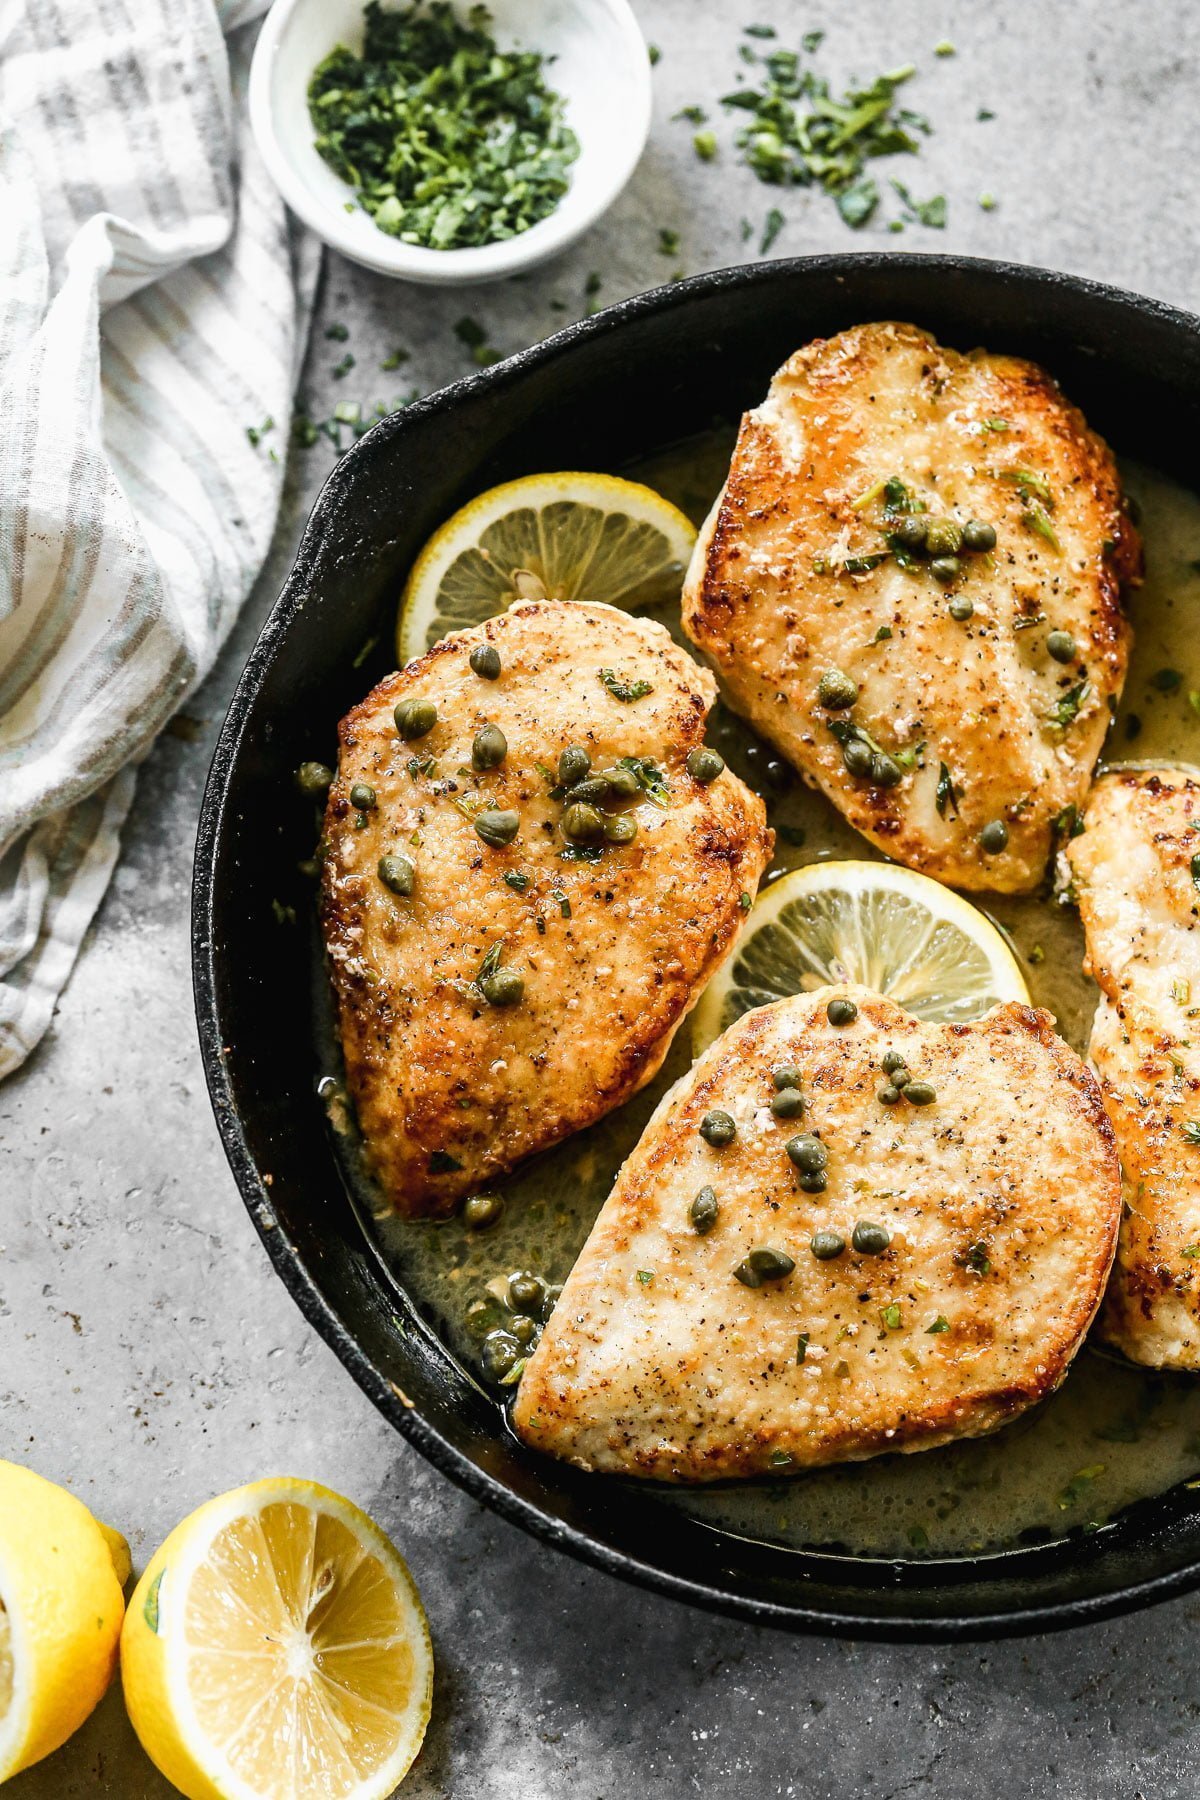 This Healthy Chicken Piccata Recipe will quickly become your new favorite weeknight dinner! Thin chicken breasts are sautéed in butter until crusty and golden brown, then smothered in a zippy lemon and white wine butter sauce. Easy, light and so delicious! 